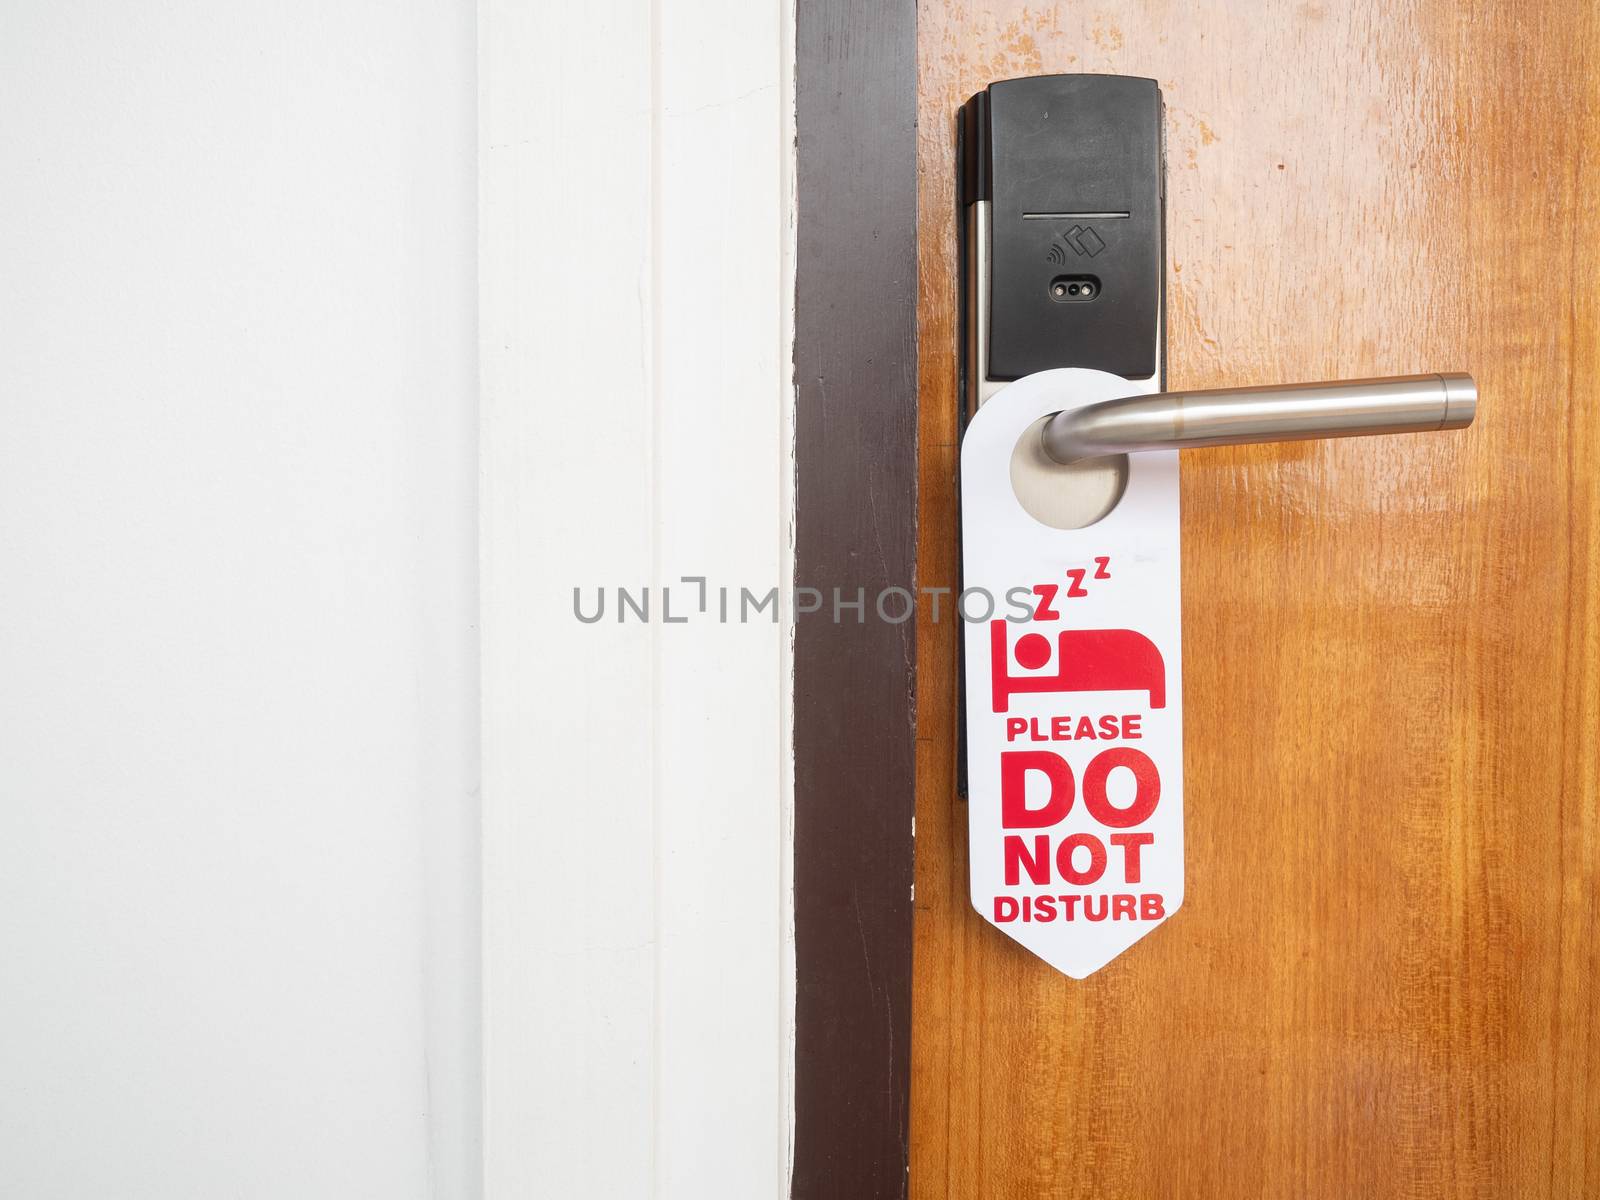 Do not disturb sign attached to the front of the room that is closed inside the hotel on the wooden door with stainless steel handles and use the electronic key system.